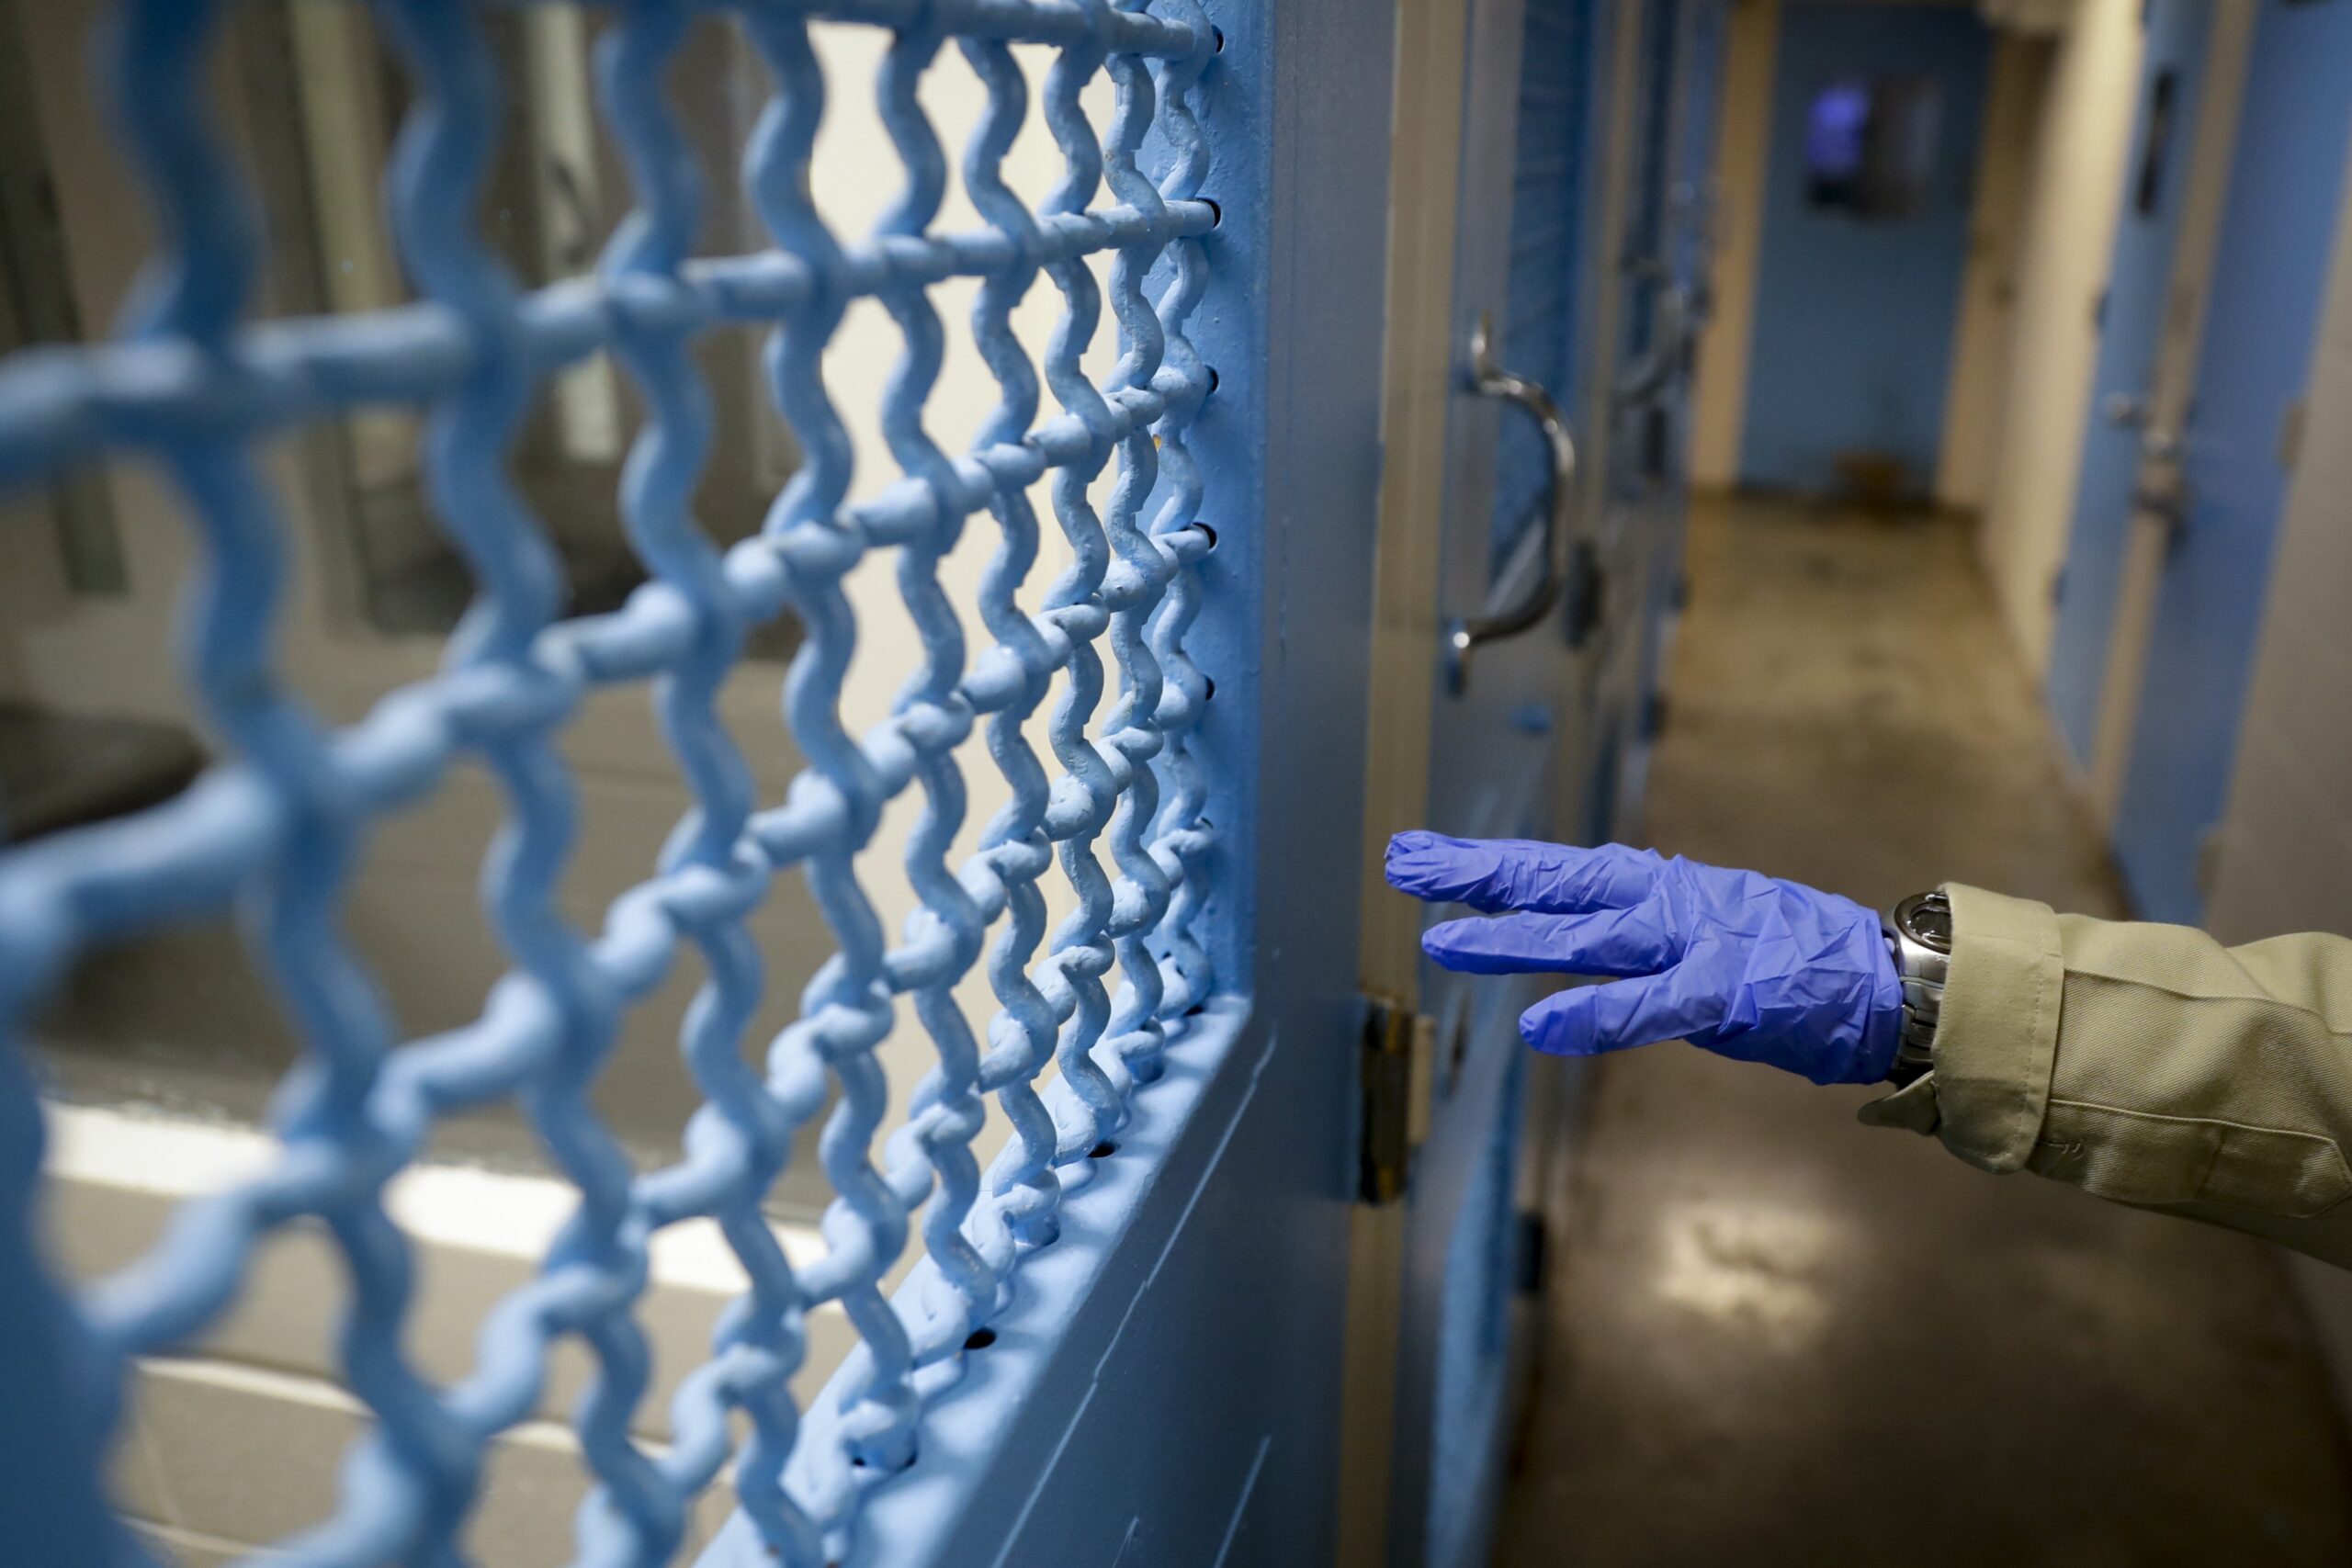 A gloved hand points to a holding cell at the hospital ward of a jail